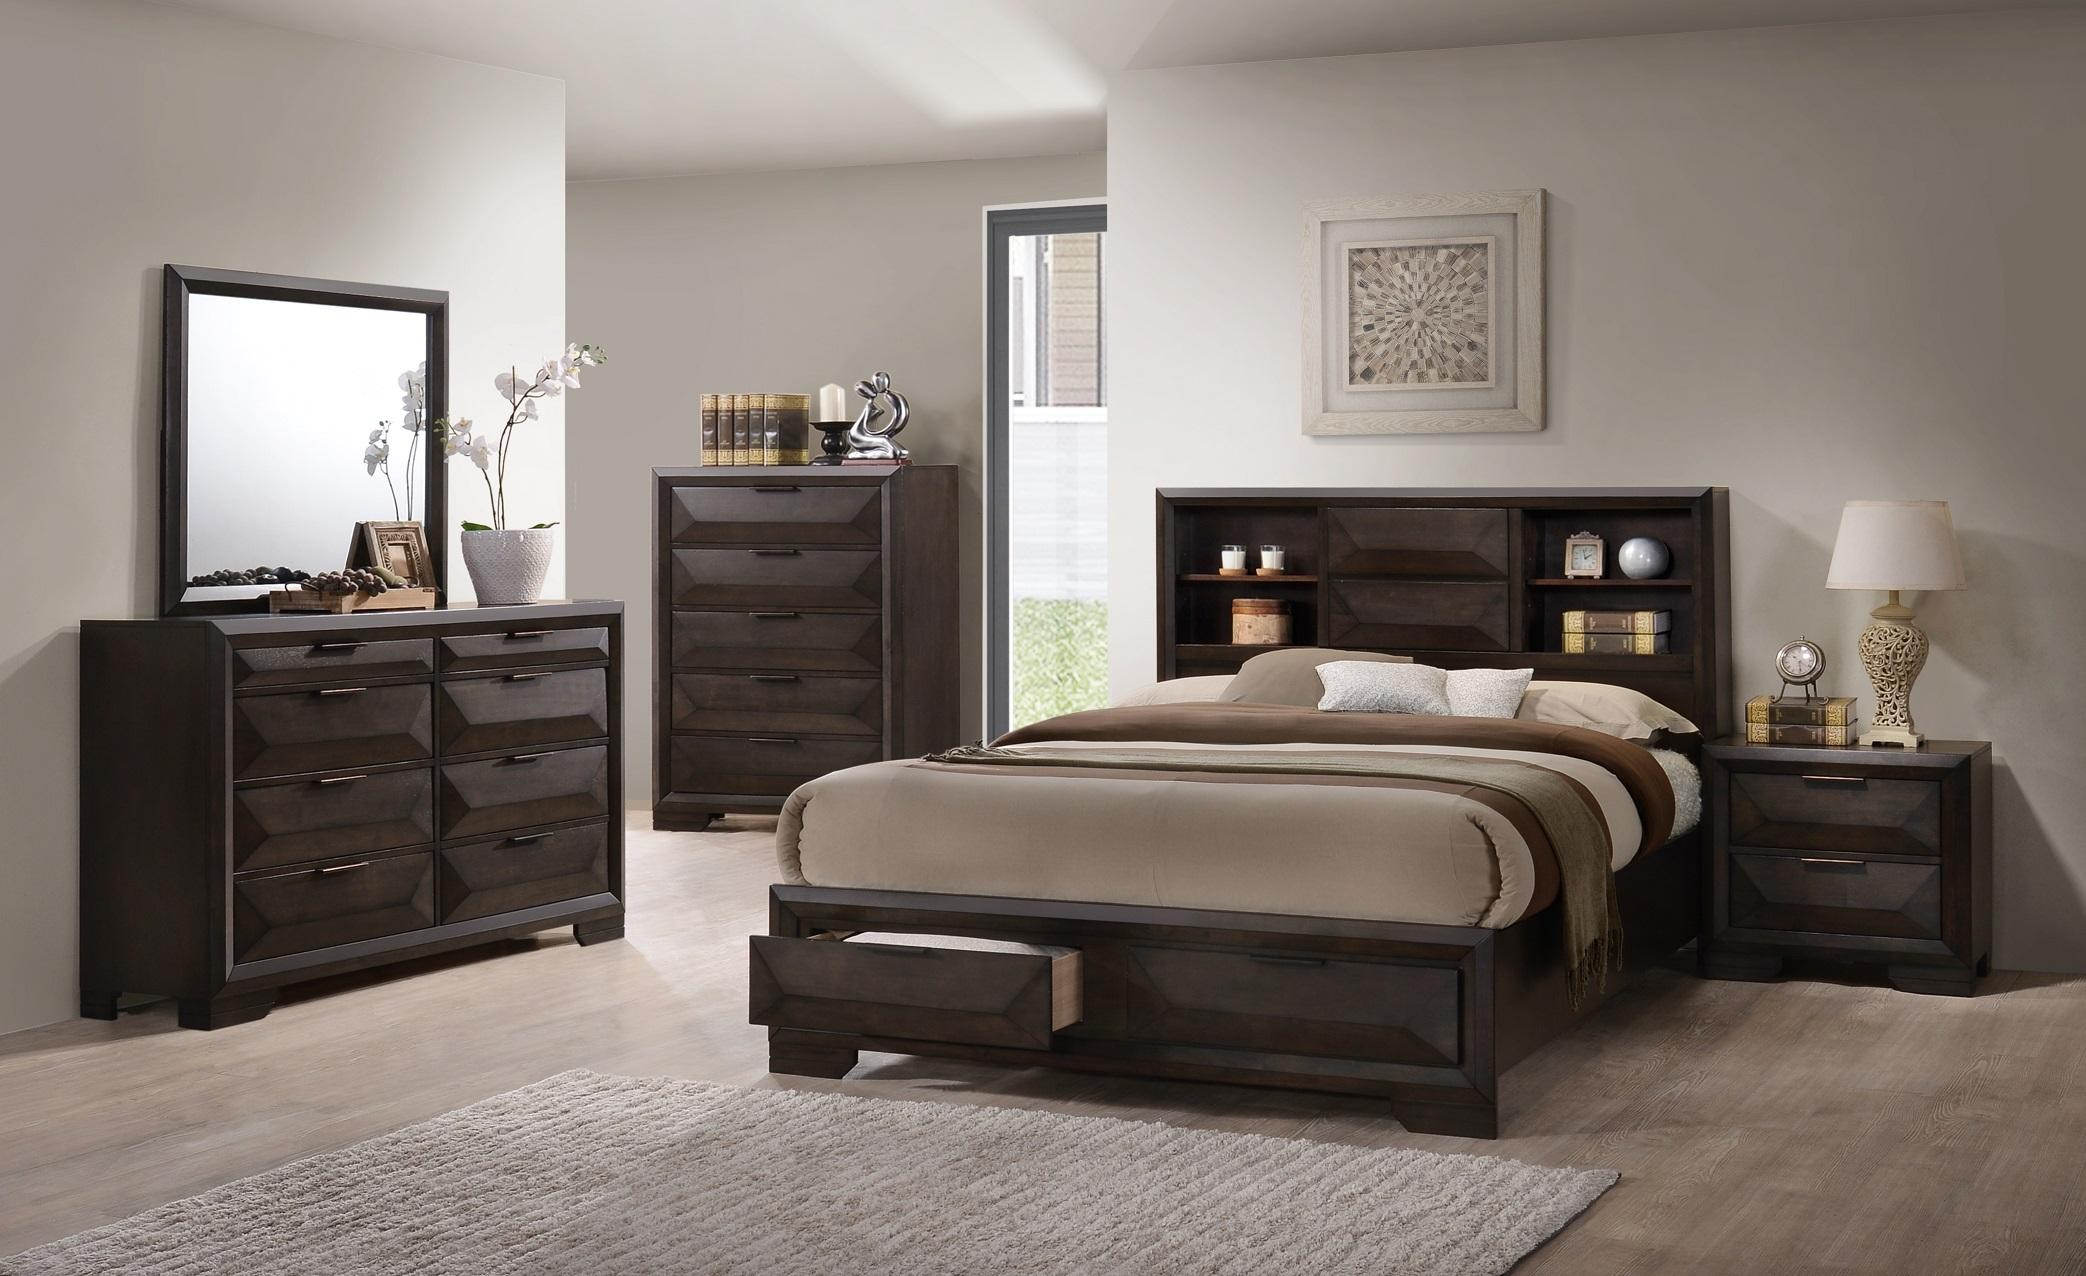 8 Pcs Wooden Bedroom Set With Storage Me 01 971 within dimensions 2086 X 1276